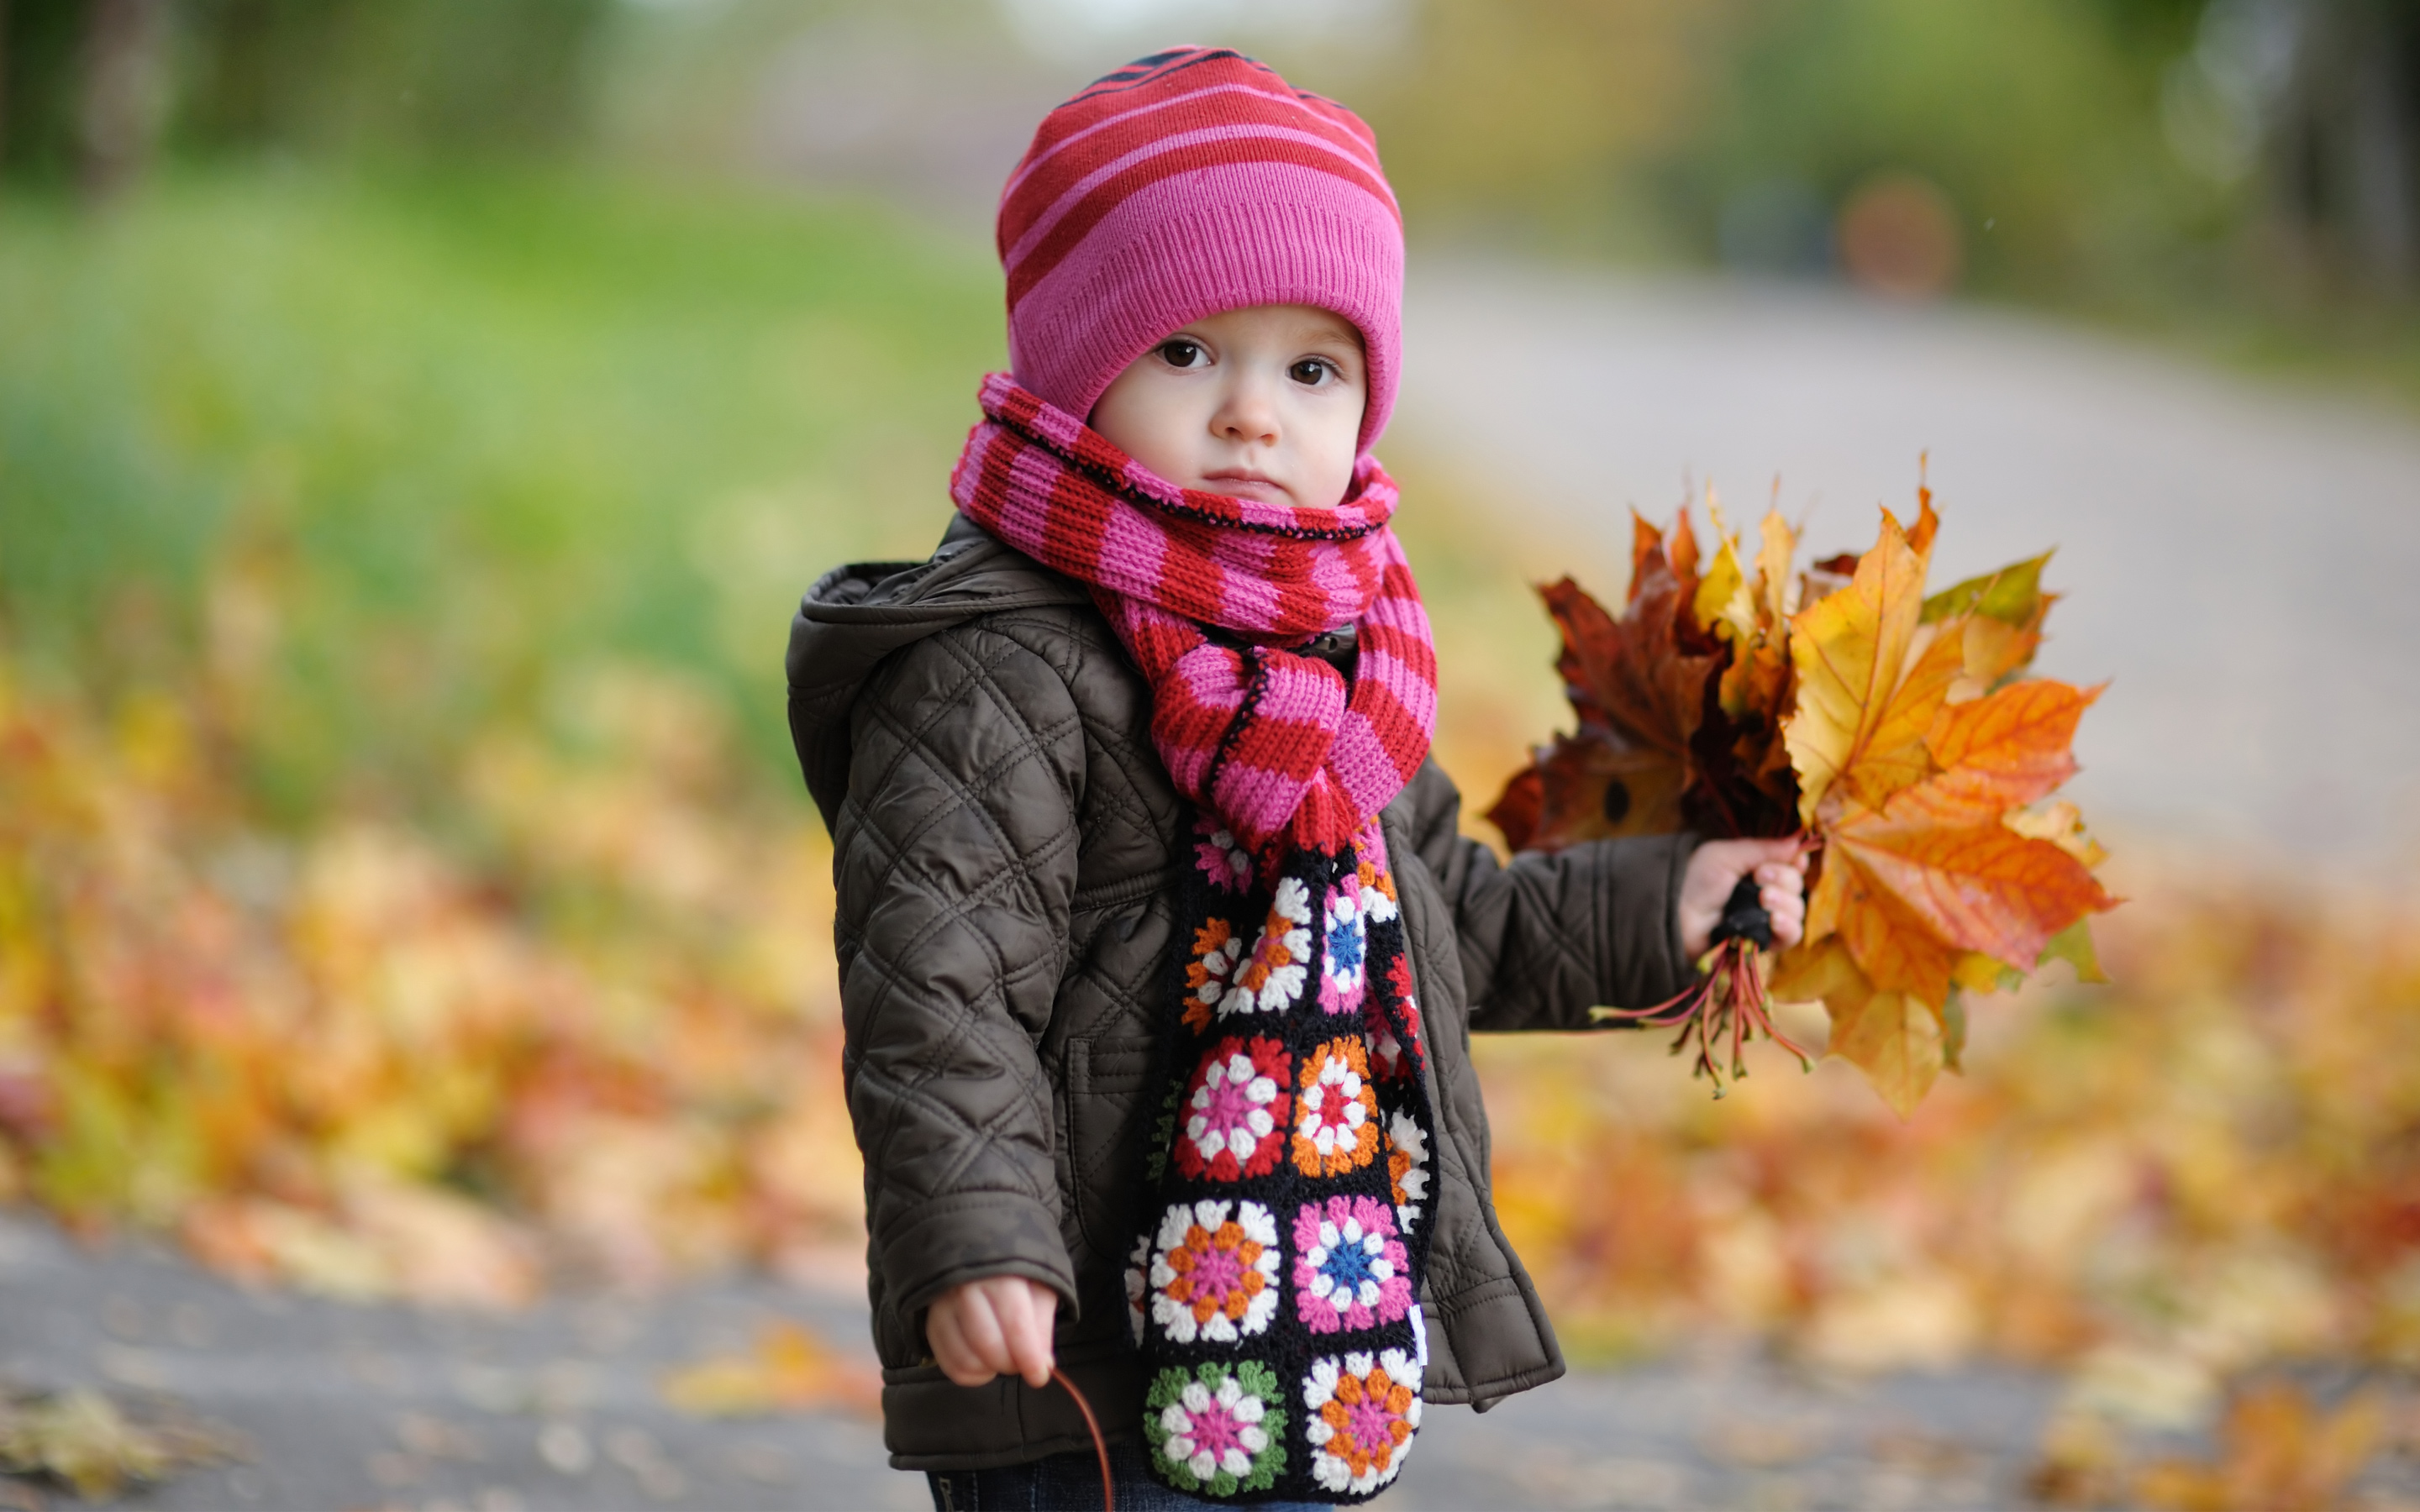 Cute Baby in Autumn Wallpapers HD Wallpapers 2560x1600